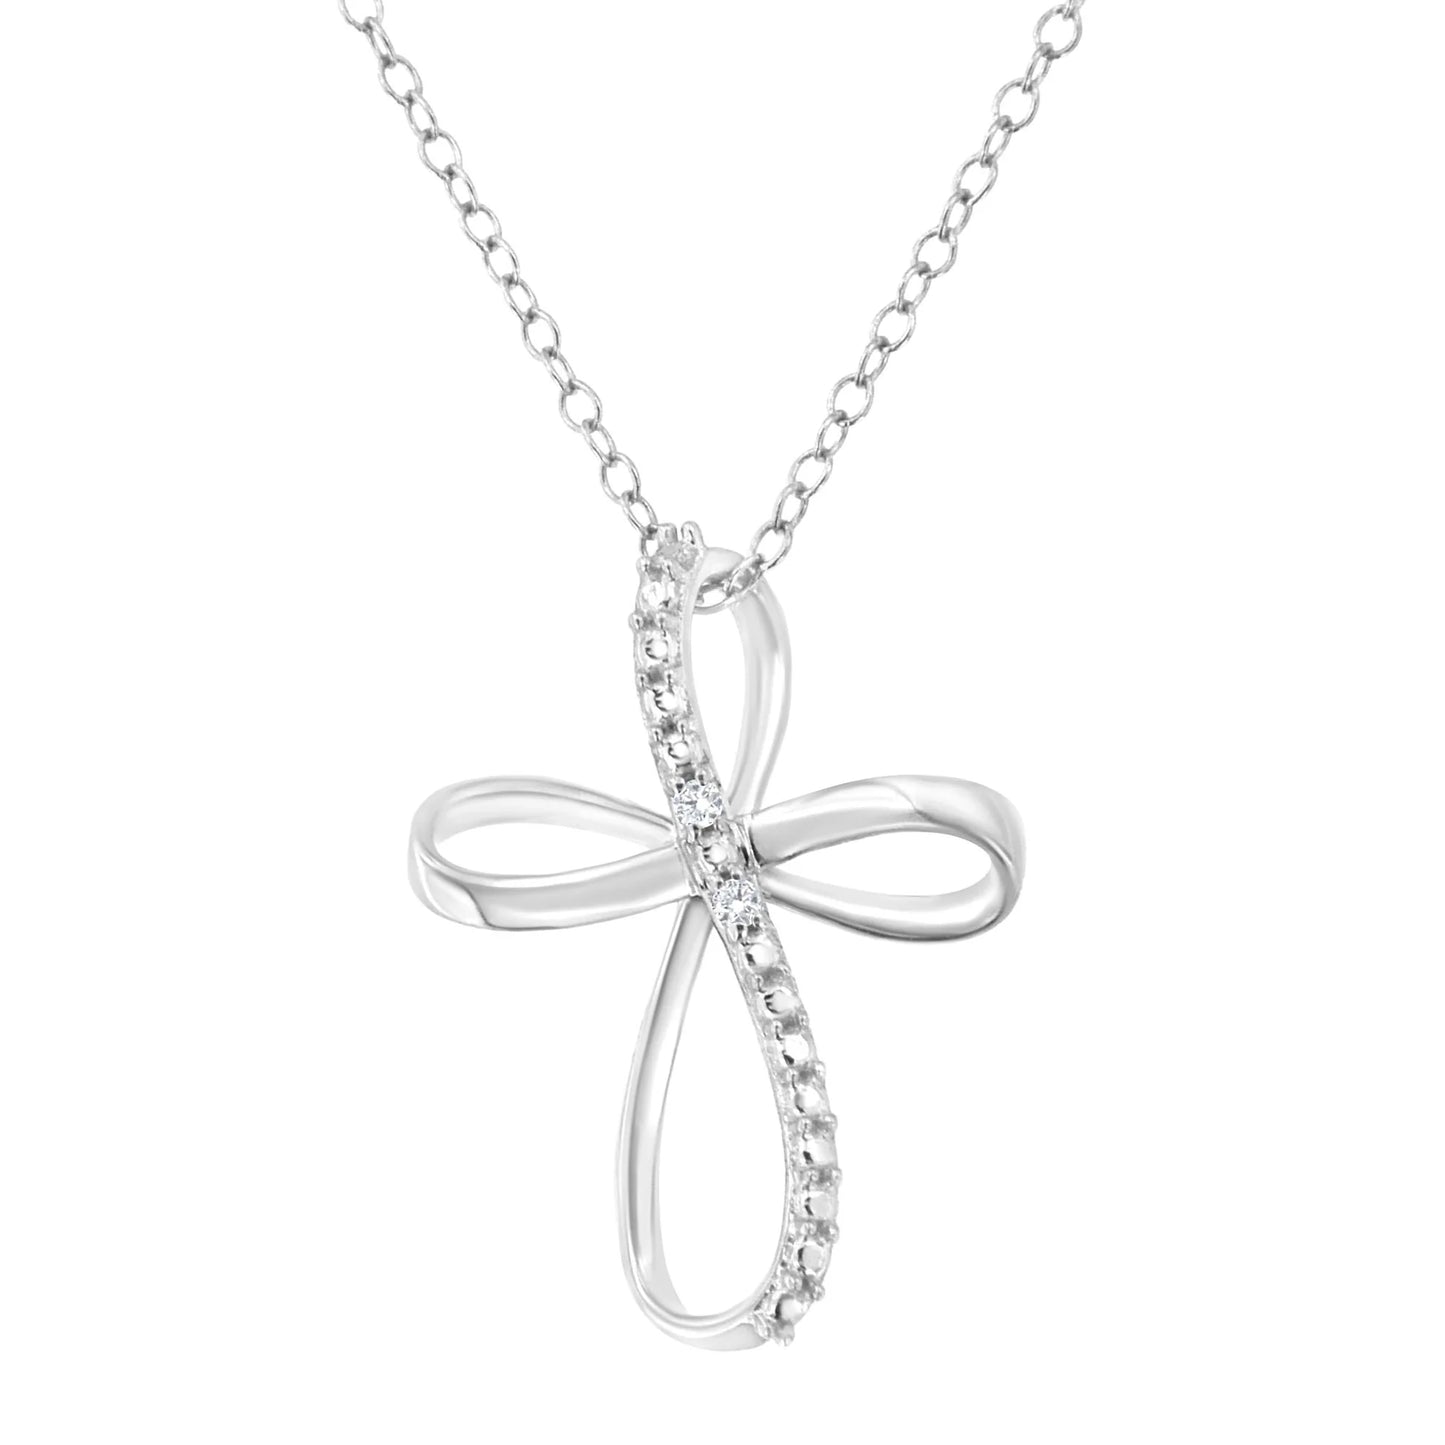 10K Yellow Gold Plated Diamond Accent Cross Ribbon 18" Pendant Necklace